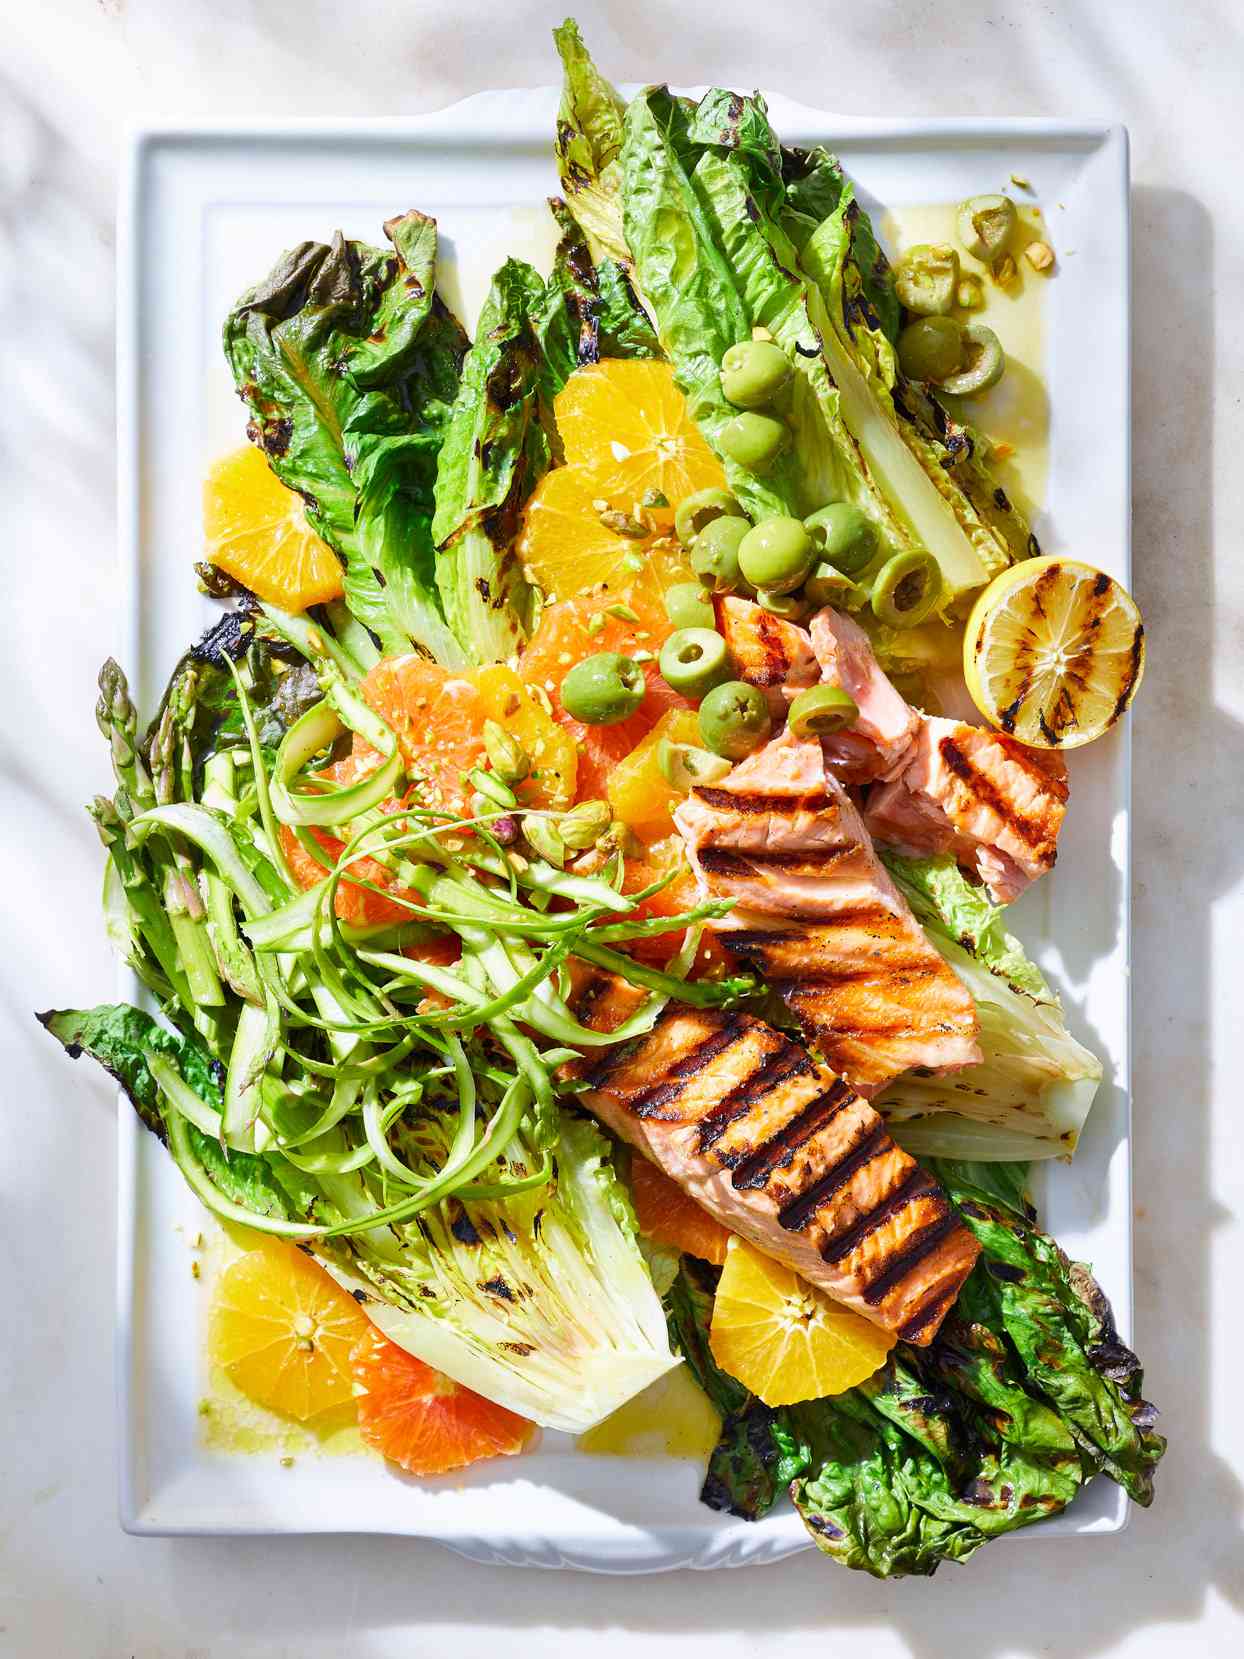 Grilled Salmon and Romaine Salad with Oranges and Olives